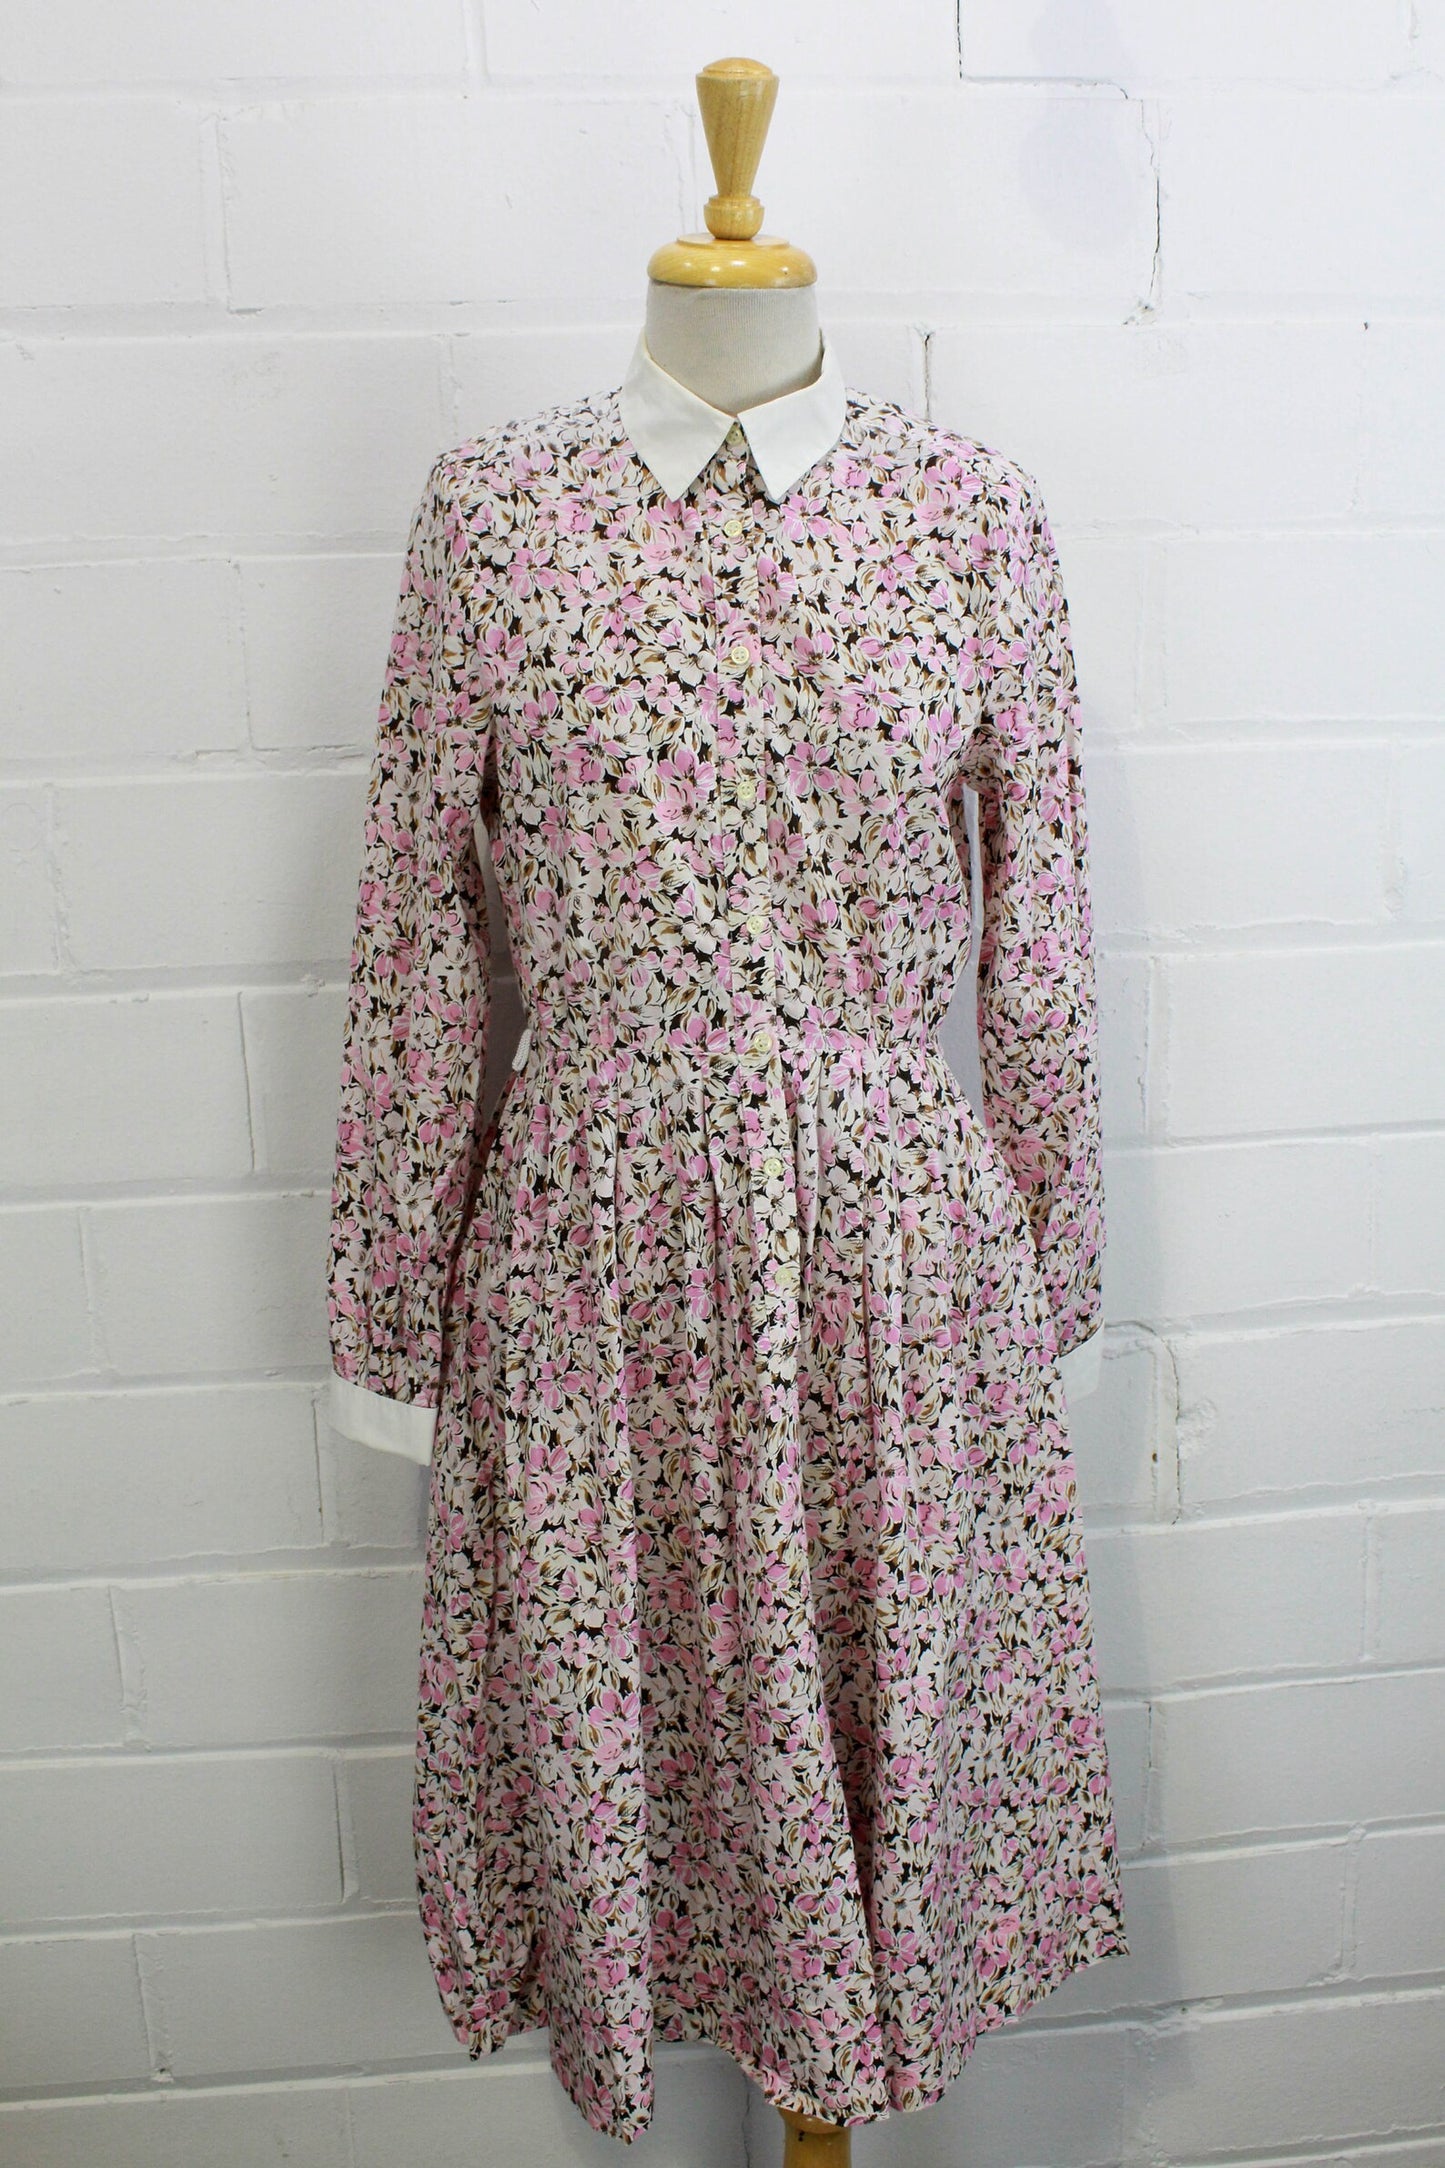 80s does 50s Horrockses Dress, Shirtwaist Dress with Pink Floral Print, Vintage Button Up Collared dress